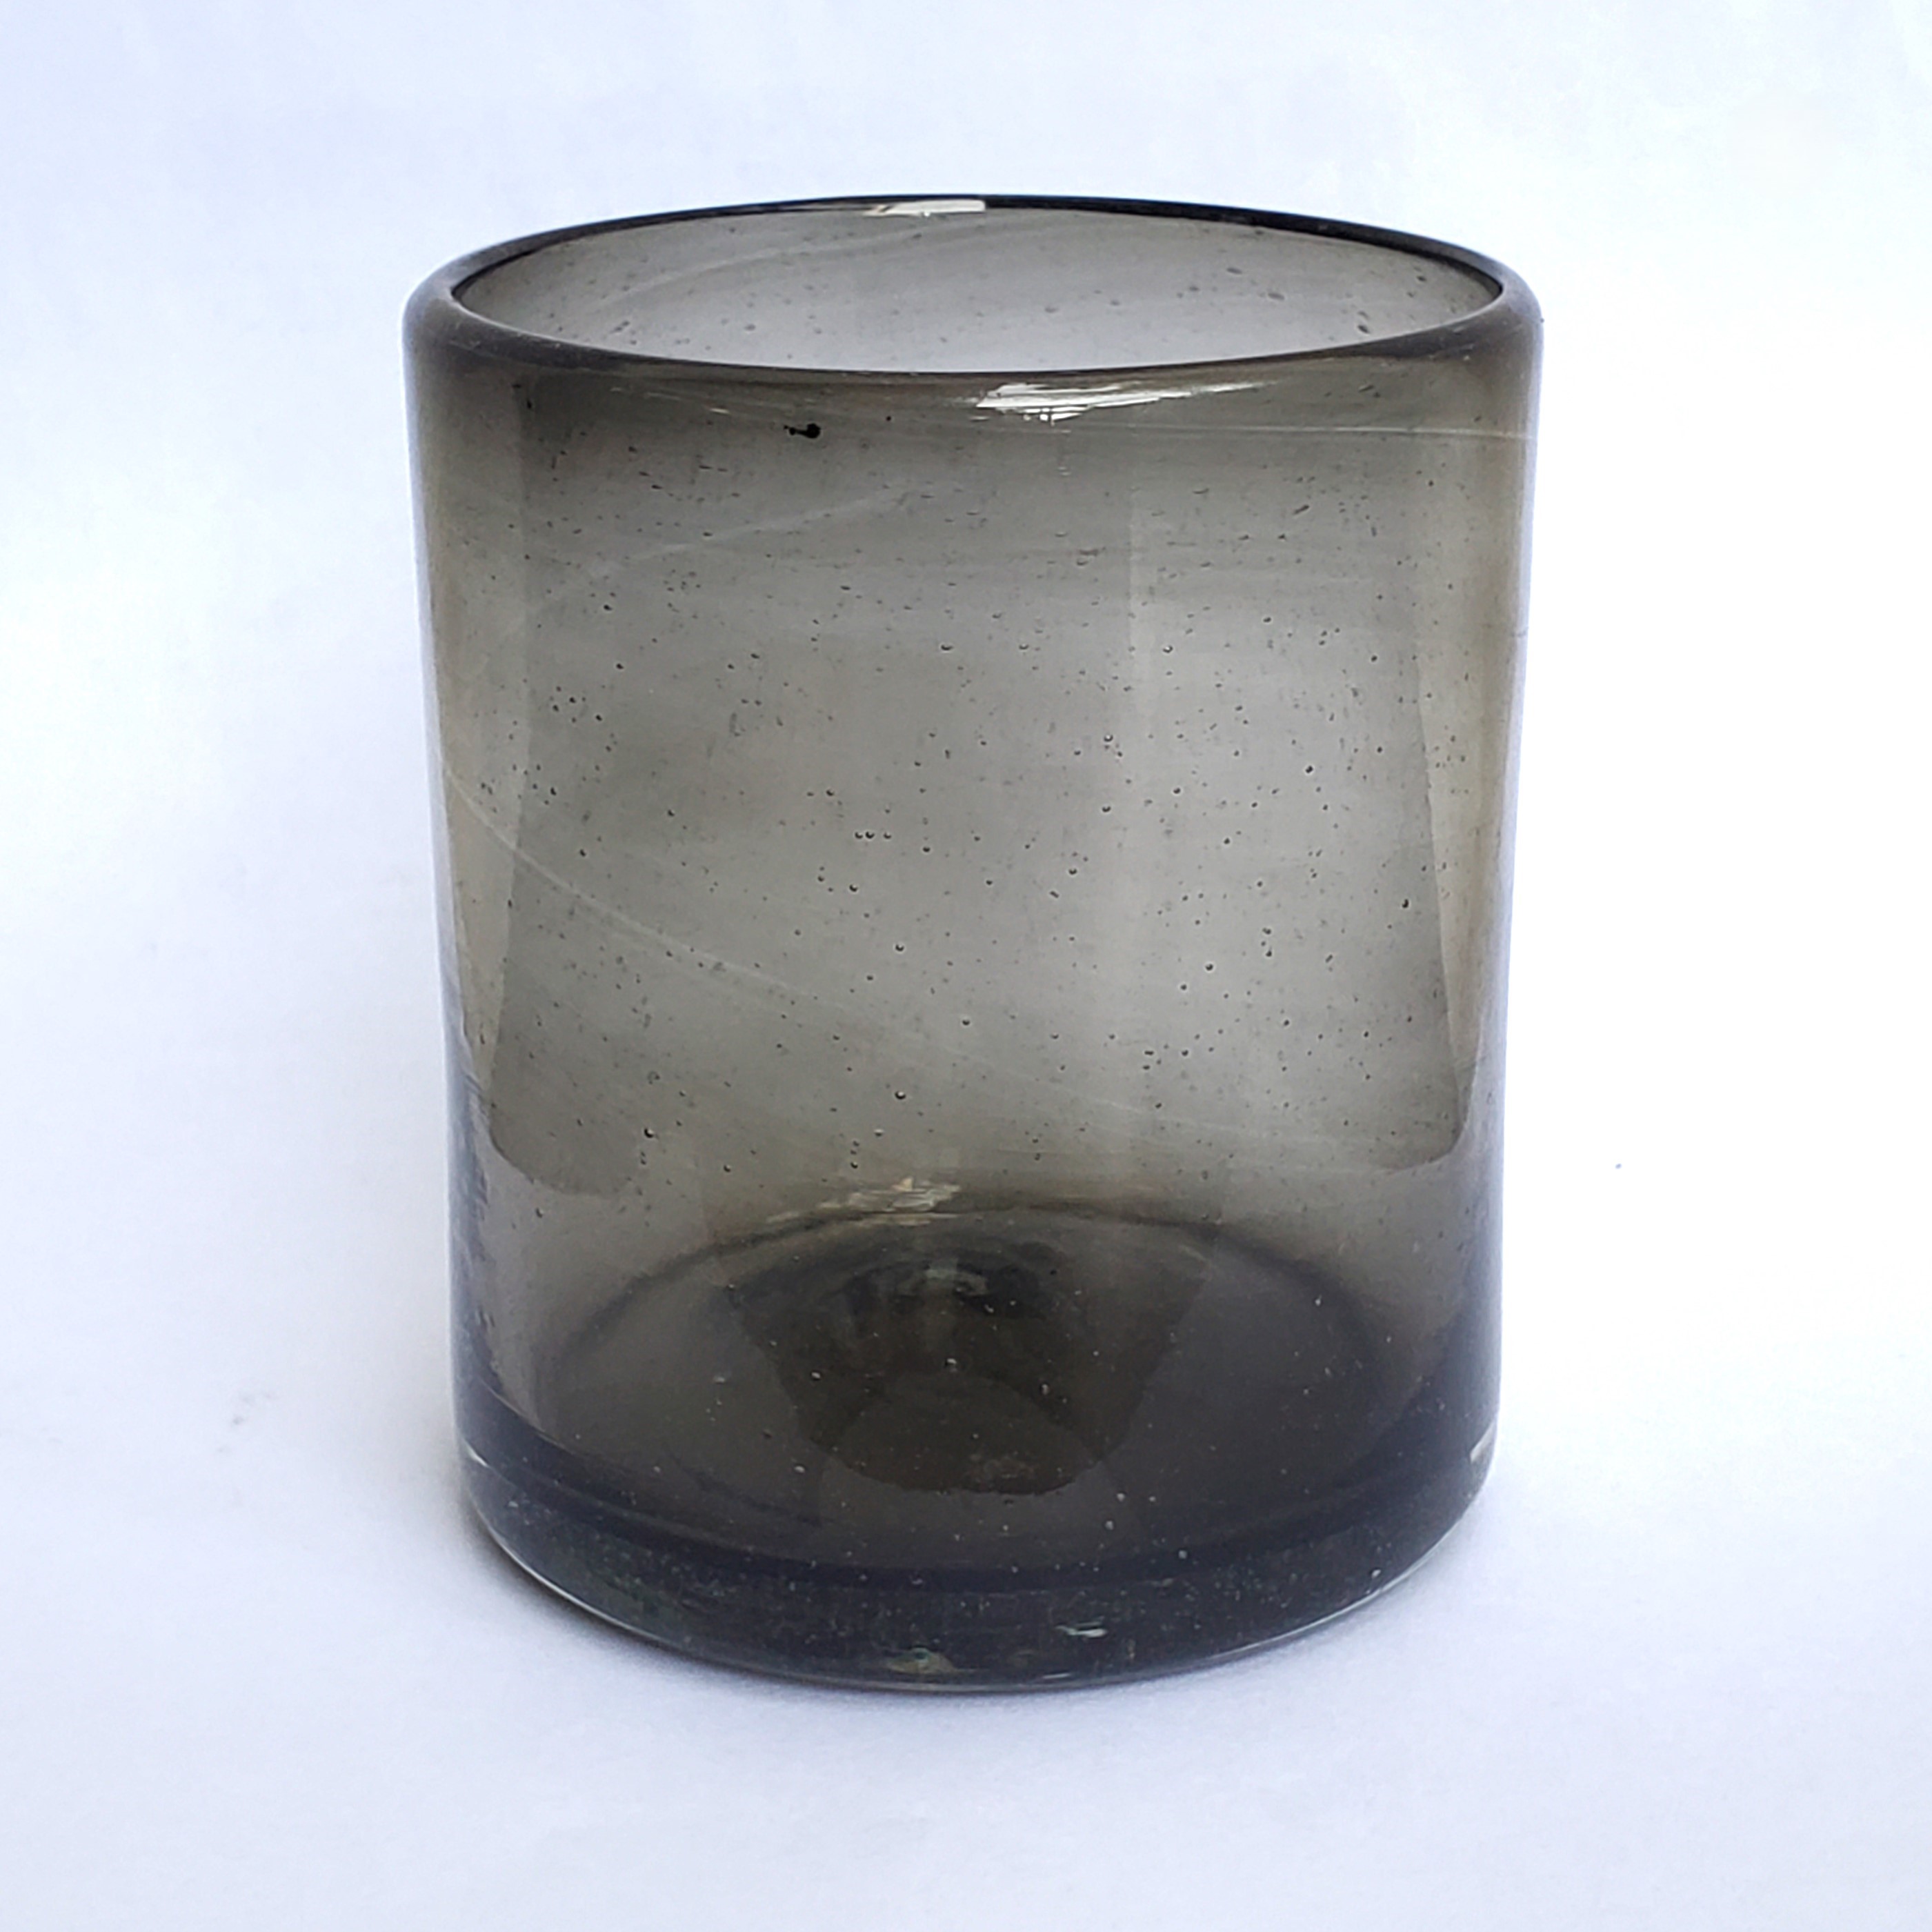 New Items / Solid Humo Smoke Gray 9 oz Short Tumblers (set of 6) / Enhance your table setting with our beautiful Smoke Gray colored glasses, from the Humo collection.